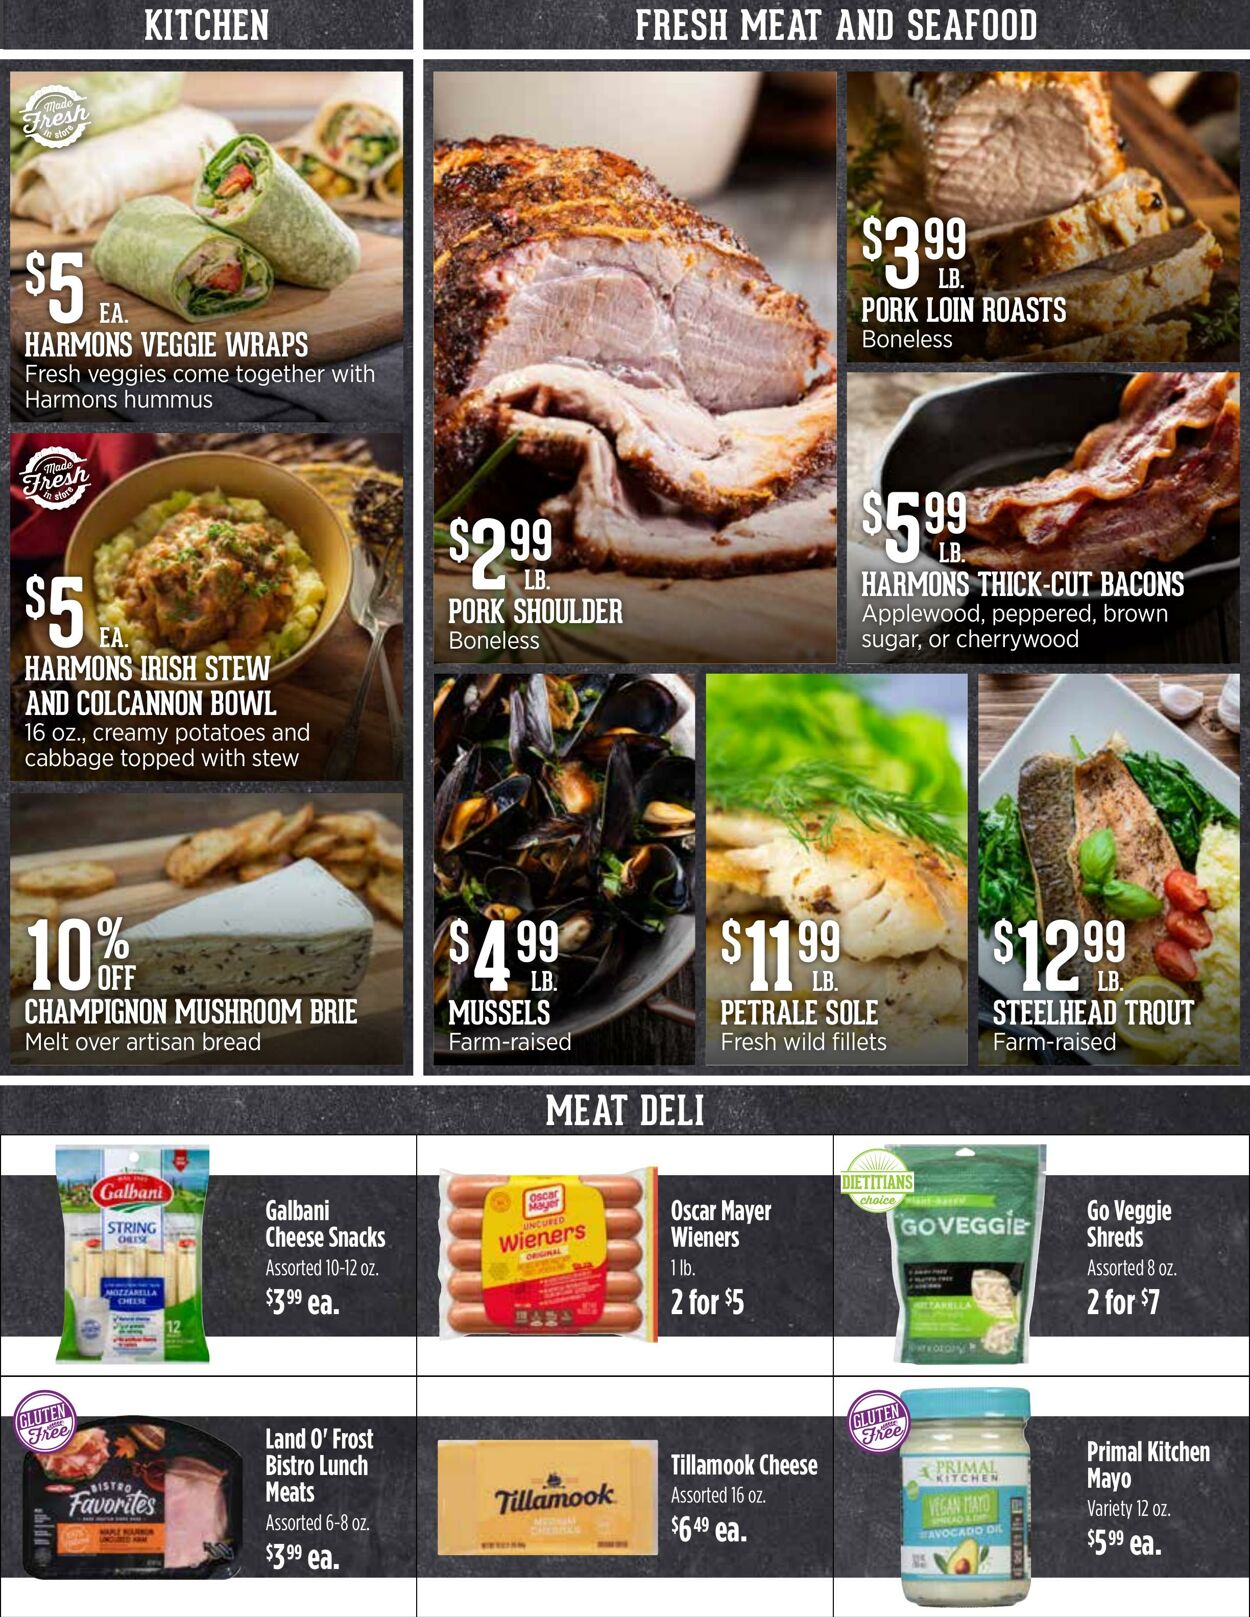 Weekly ad Harmons Grocery 02/28/2023 - 03/06/2023